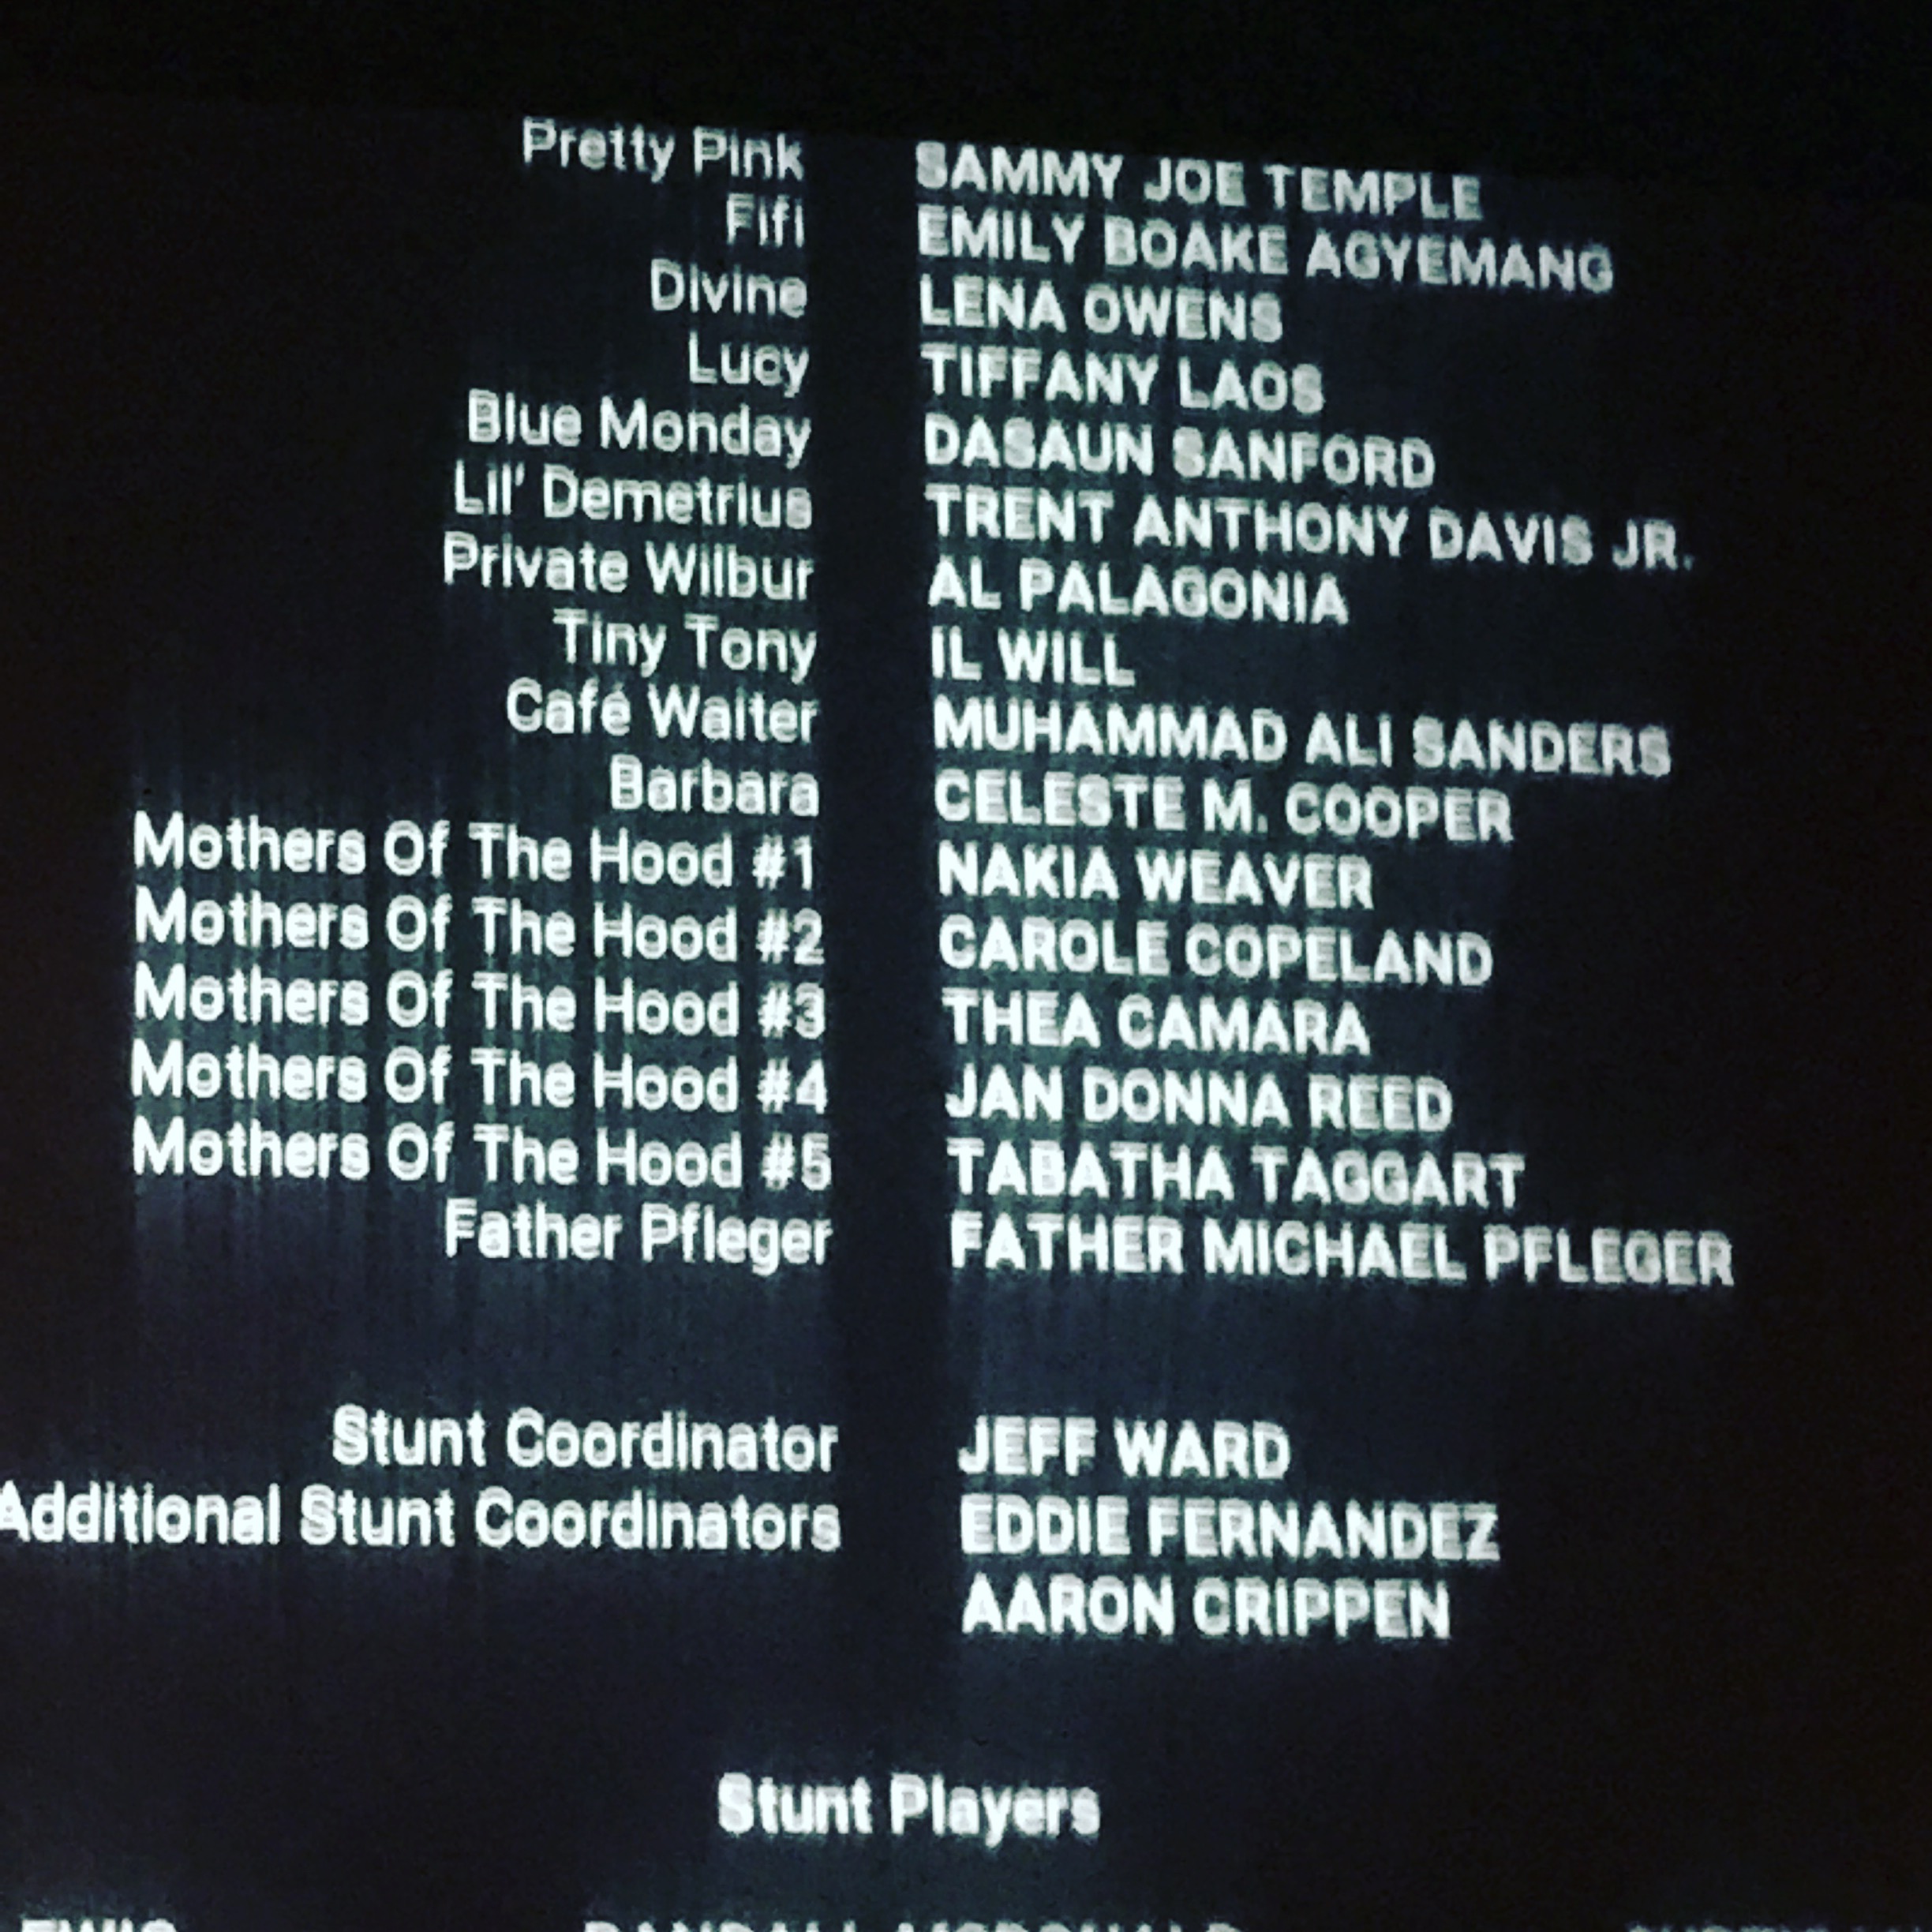 My first on screen credit for the movie Chi-Raq